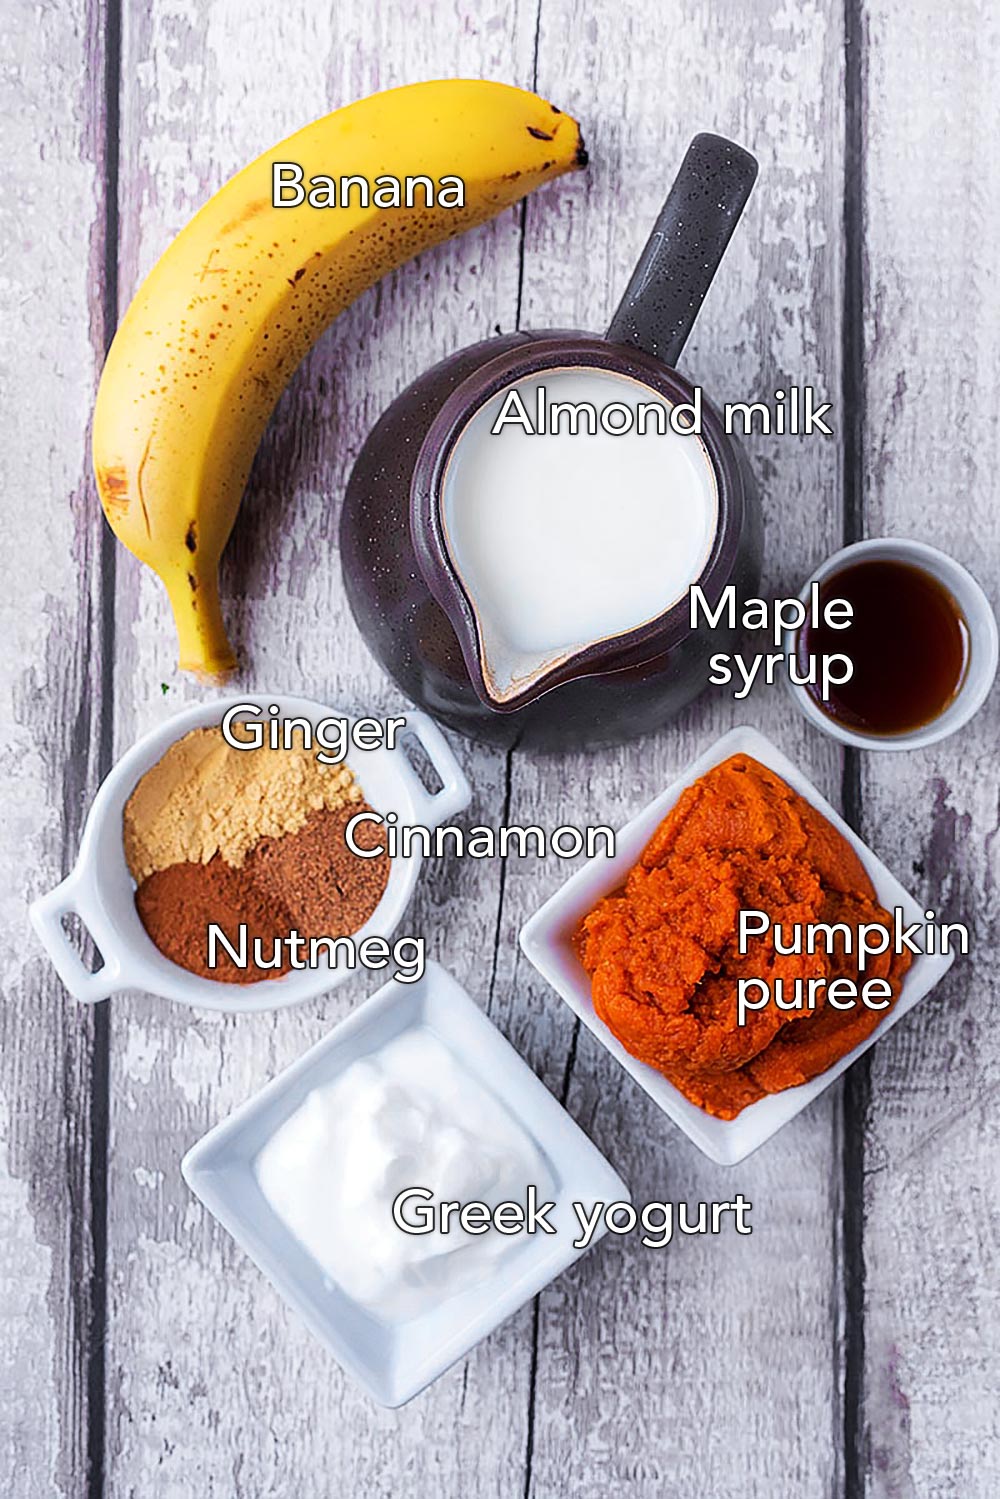 A banana, a jug of milk, some pumpkin puree, spices, maple syrup and yogurt all on a wooden surface.